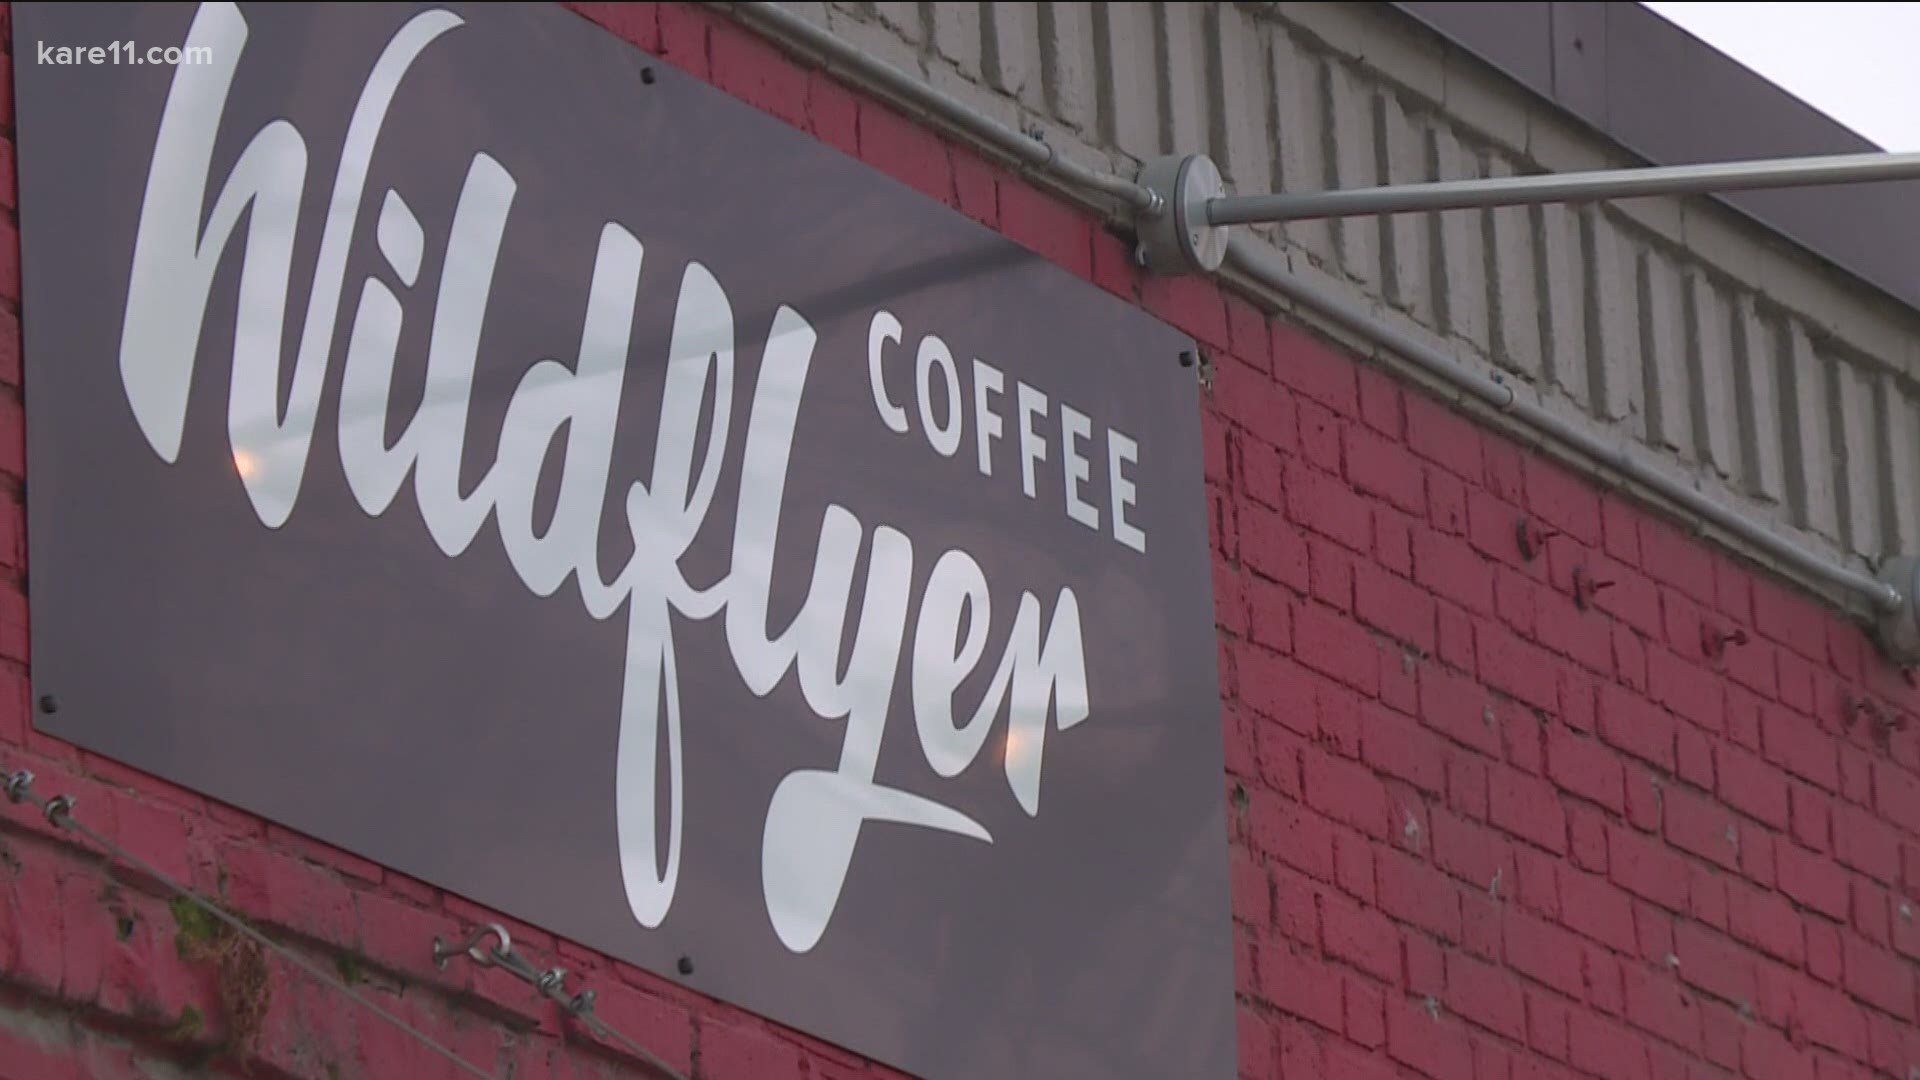 Wildflyer Coffee is giving young people a paycheck and the training they need to turn their lives around.